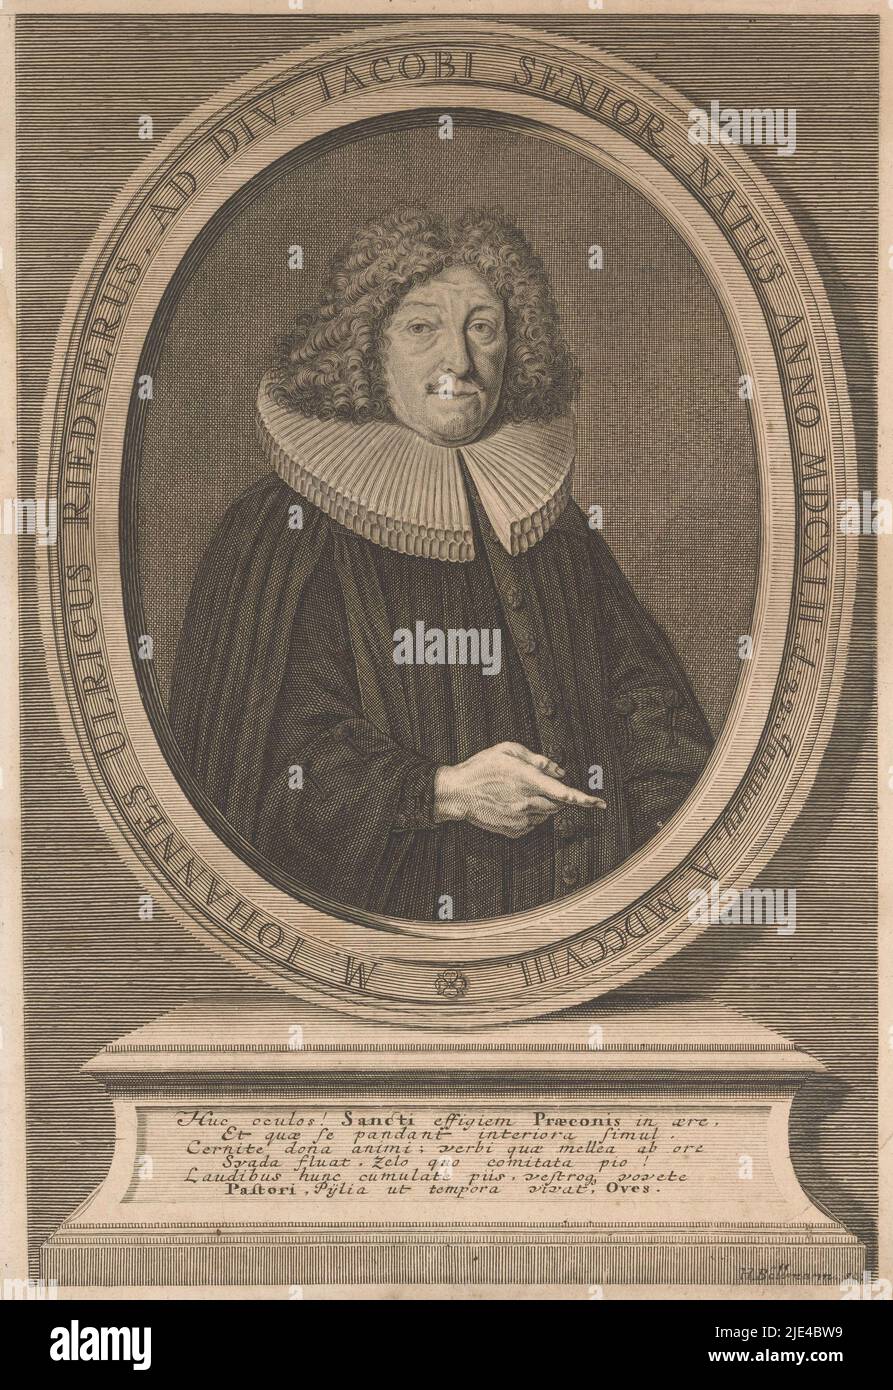 Portrait of Johann Ulrich Riedner, Hieronymus Böllmann, 1708, print maker: Hieronymus Böllmann, (mentioned on object), Neurenberg, 1708, paper, engraving, h 321 mm × w 225 mm Stock Photo